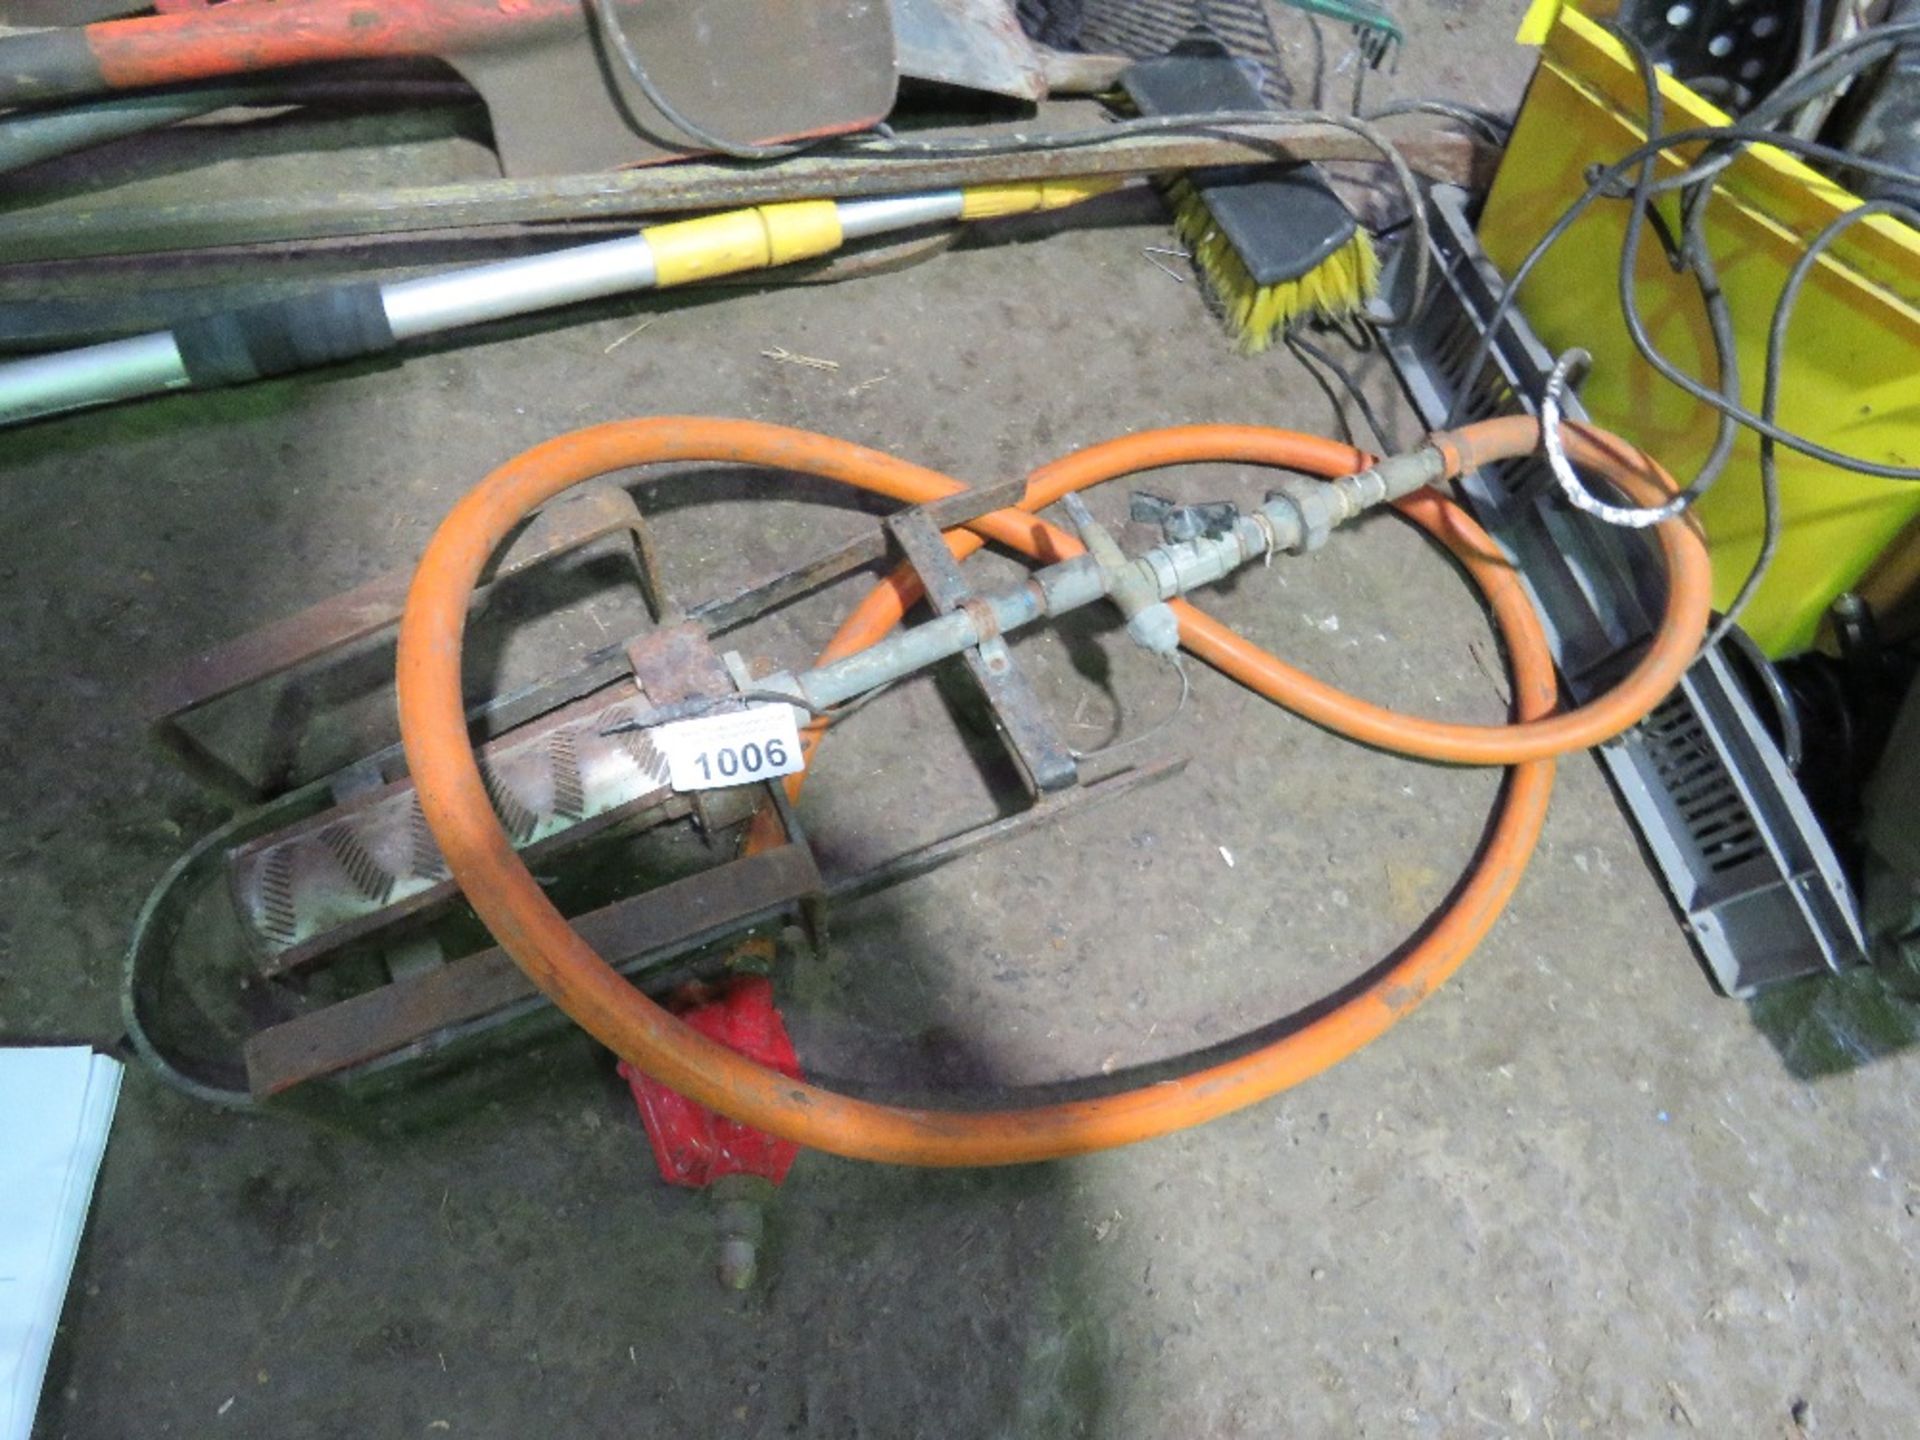 GAS BURNER. SOURCED FROM COMPANY LIQUIDATION.